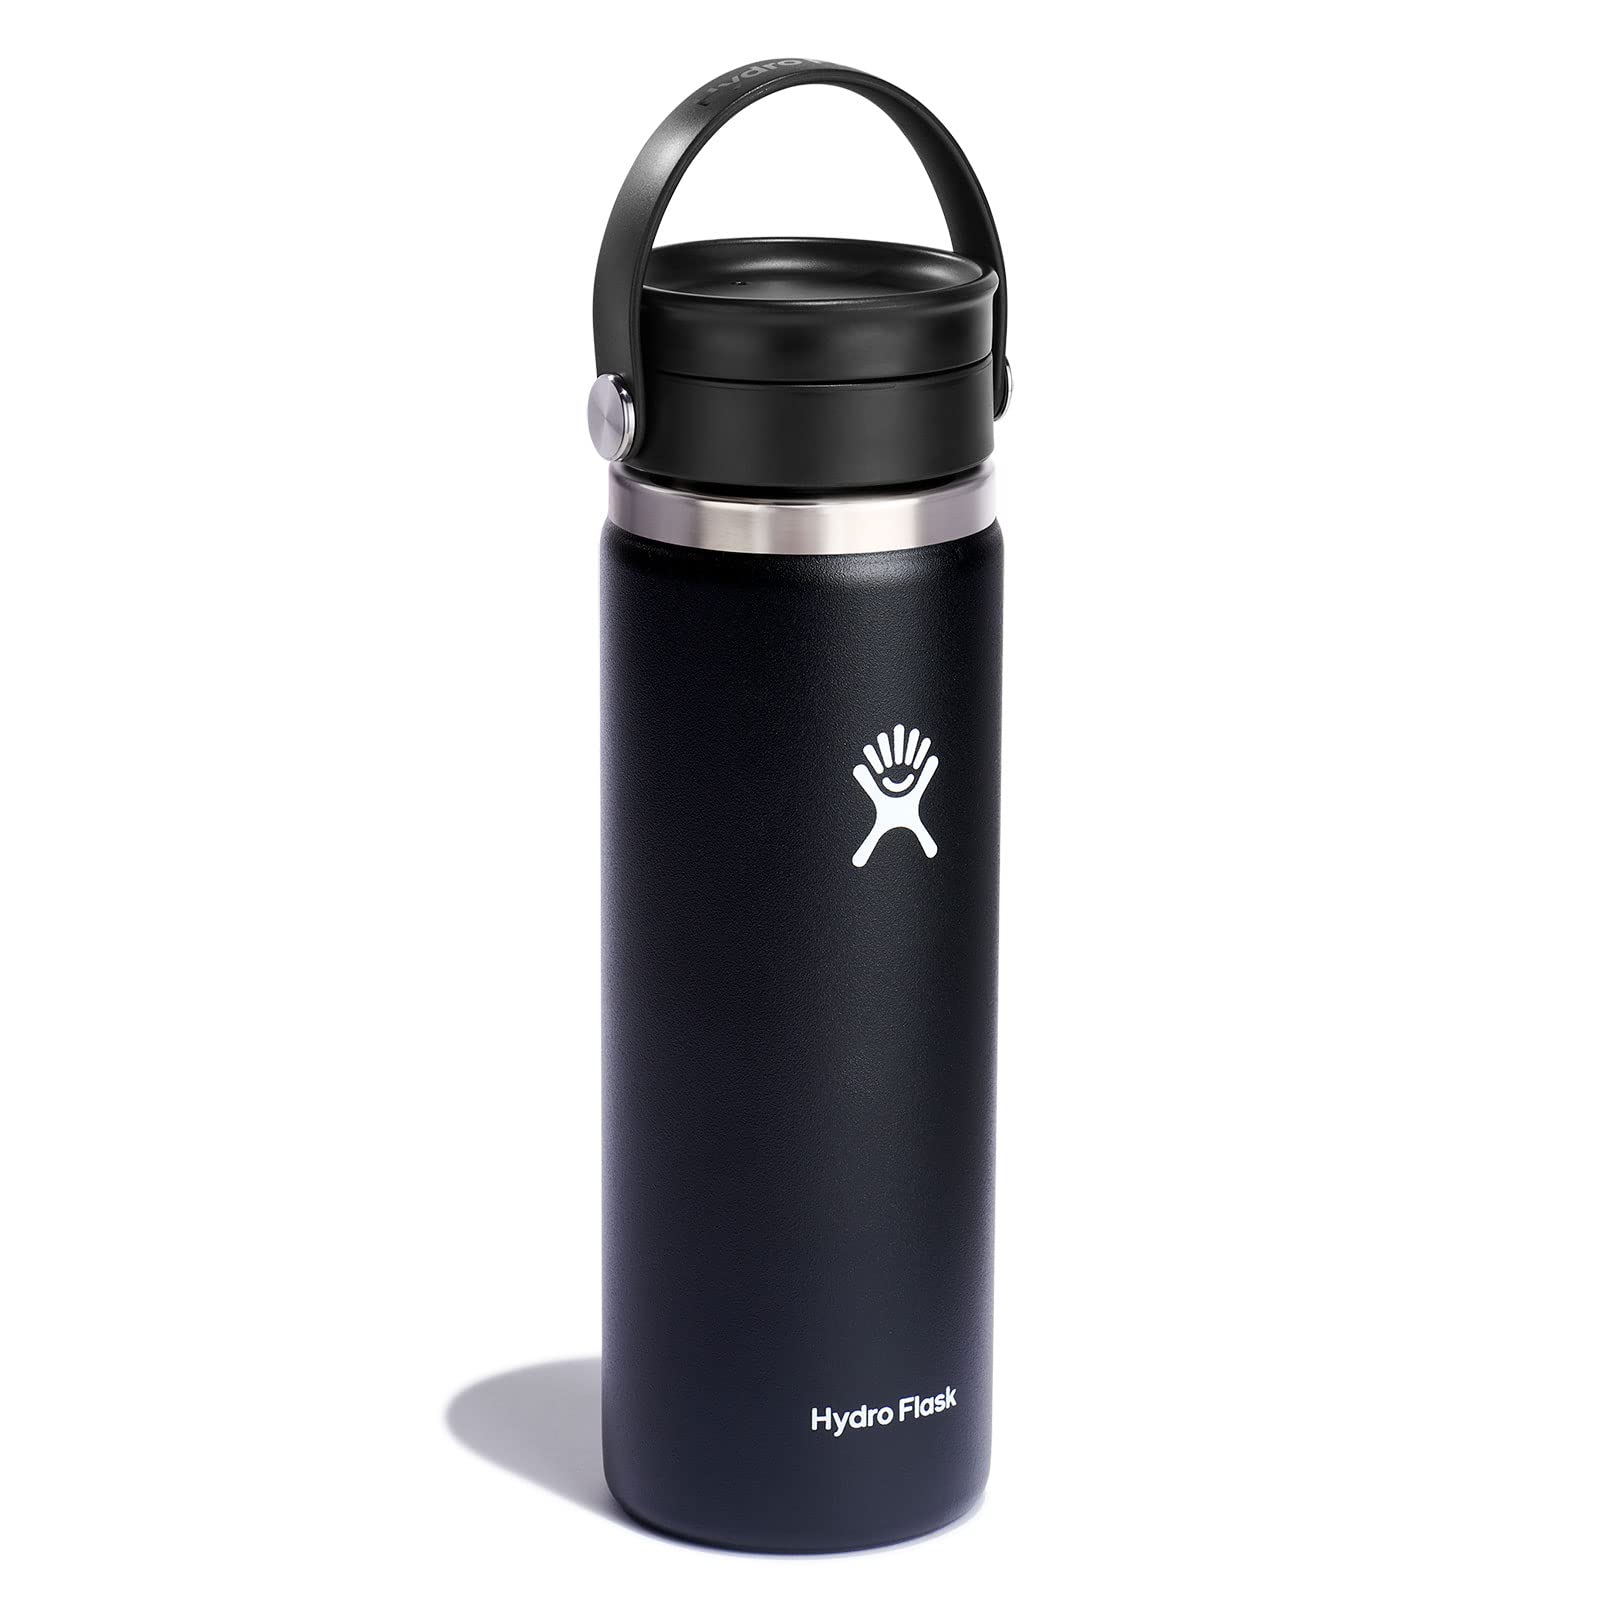 20-Oz Hydro Flask Wide Mouth Insulated Water Bottle w/ Flex Sip Lid (Black or Blue) $14.96 Shipping is free w/ Prime or on orders $25+